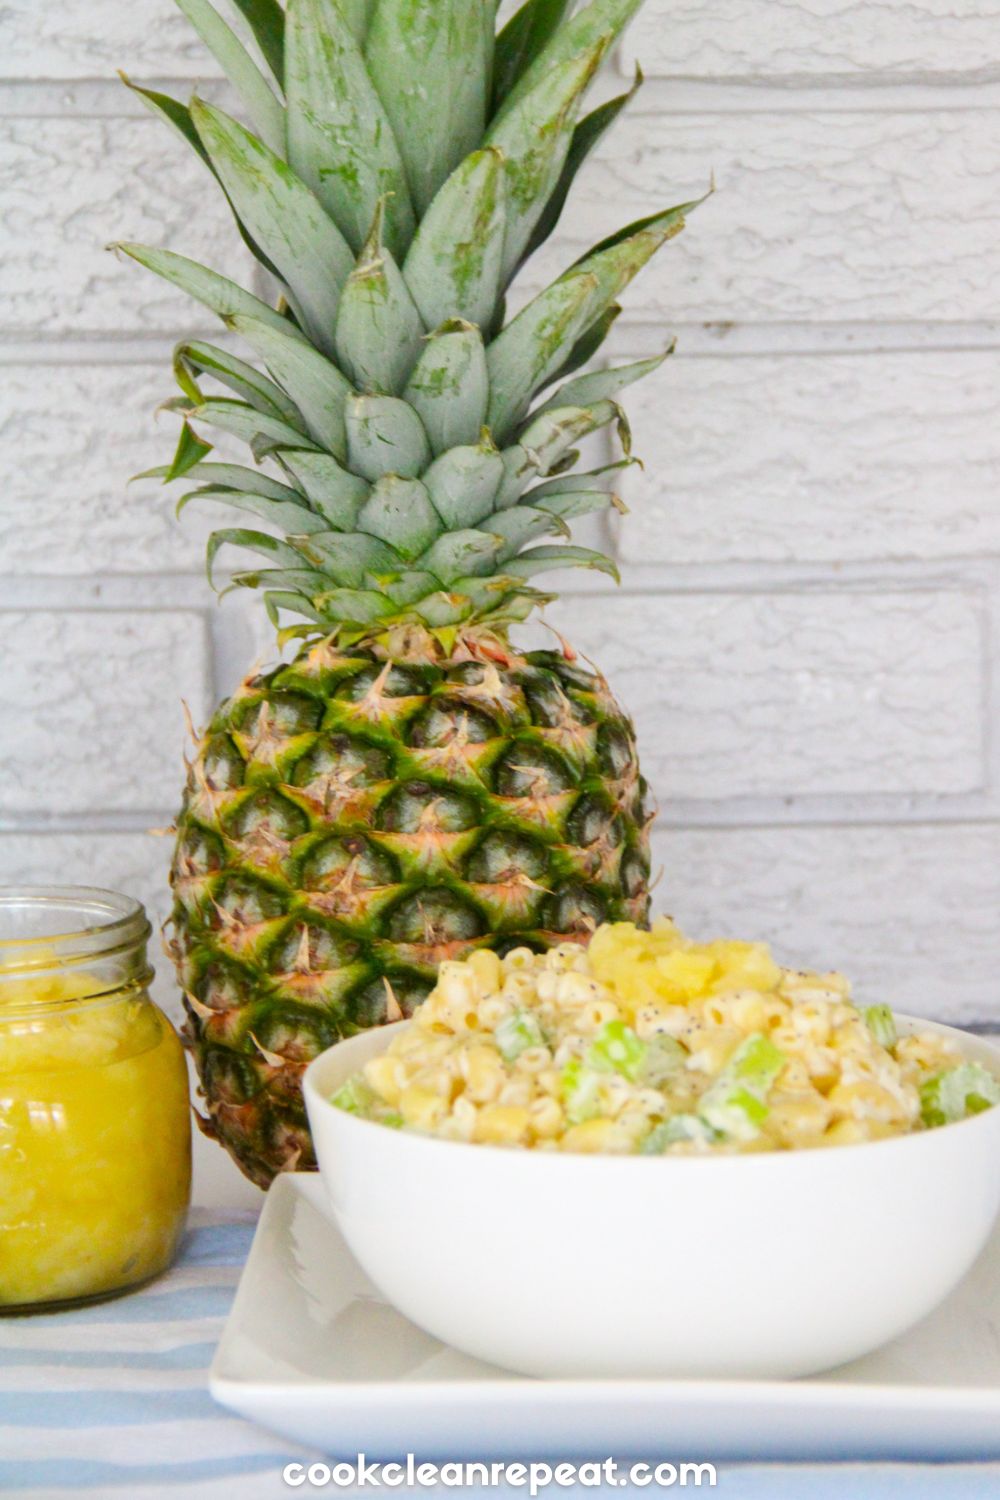 pineapple pasta salad styled with a full pineapple and crushed pineapple